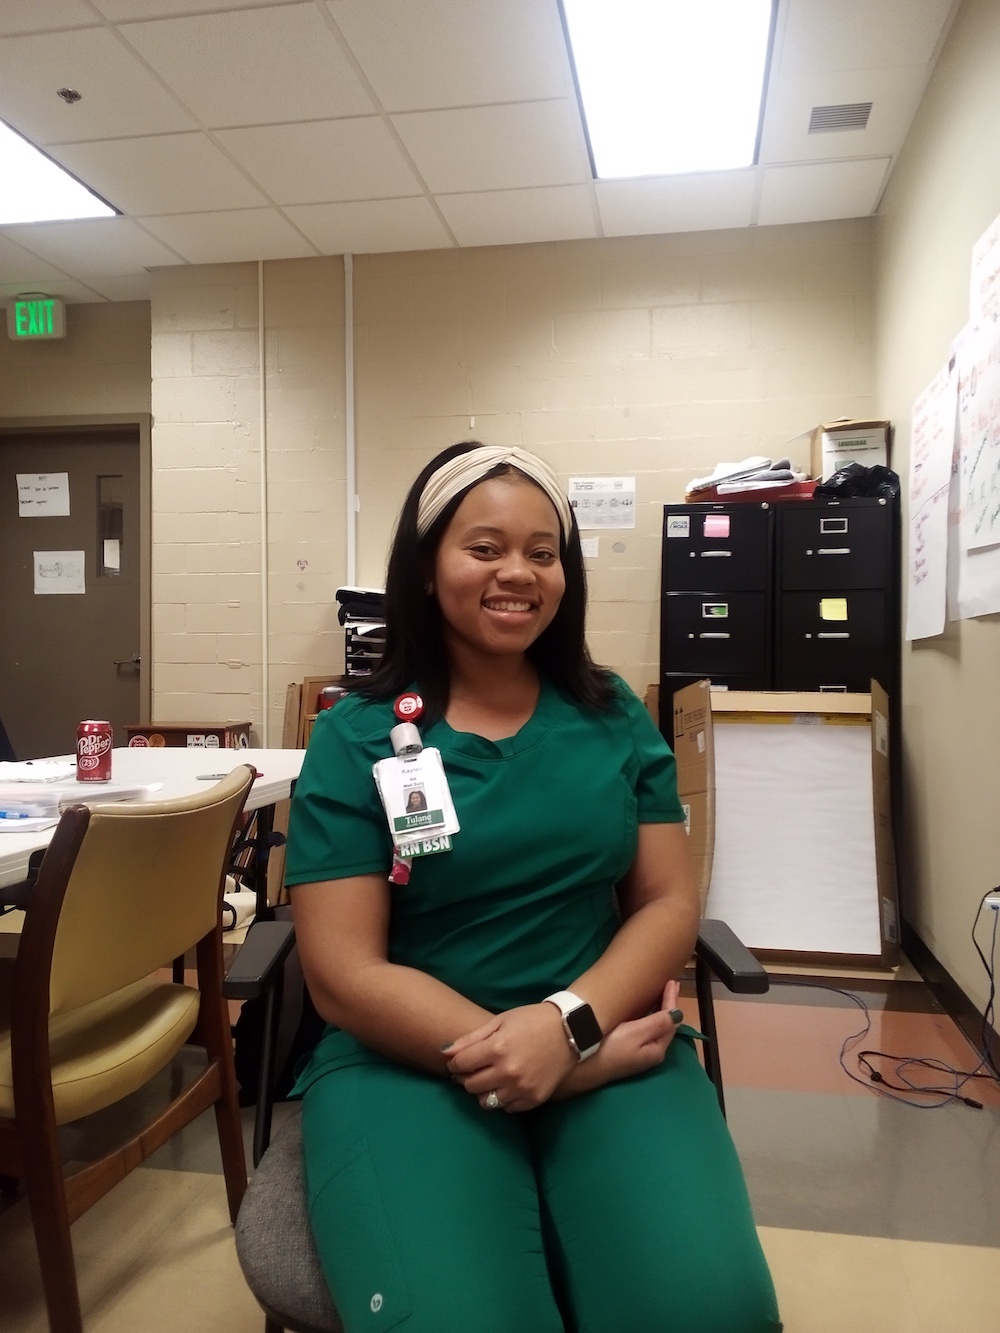 Black woman wearing green scrubs and a hair band, sitting in chair and smiling